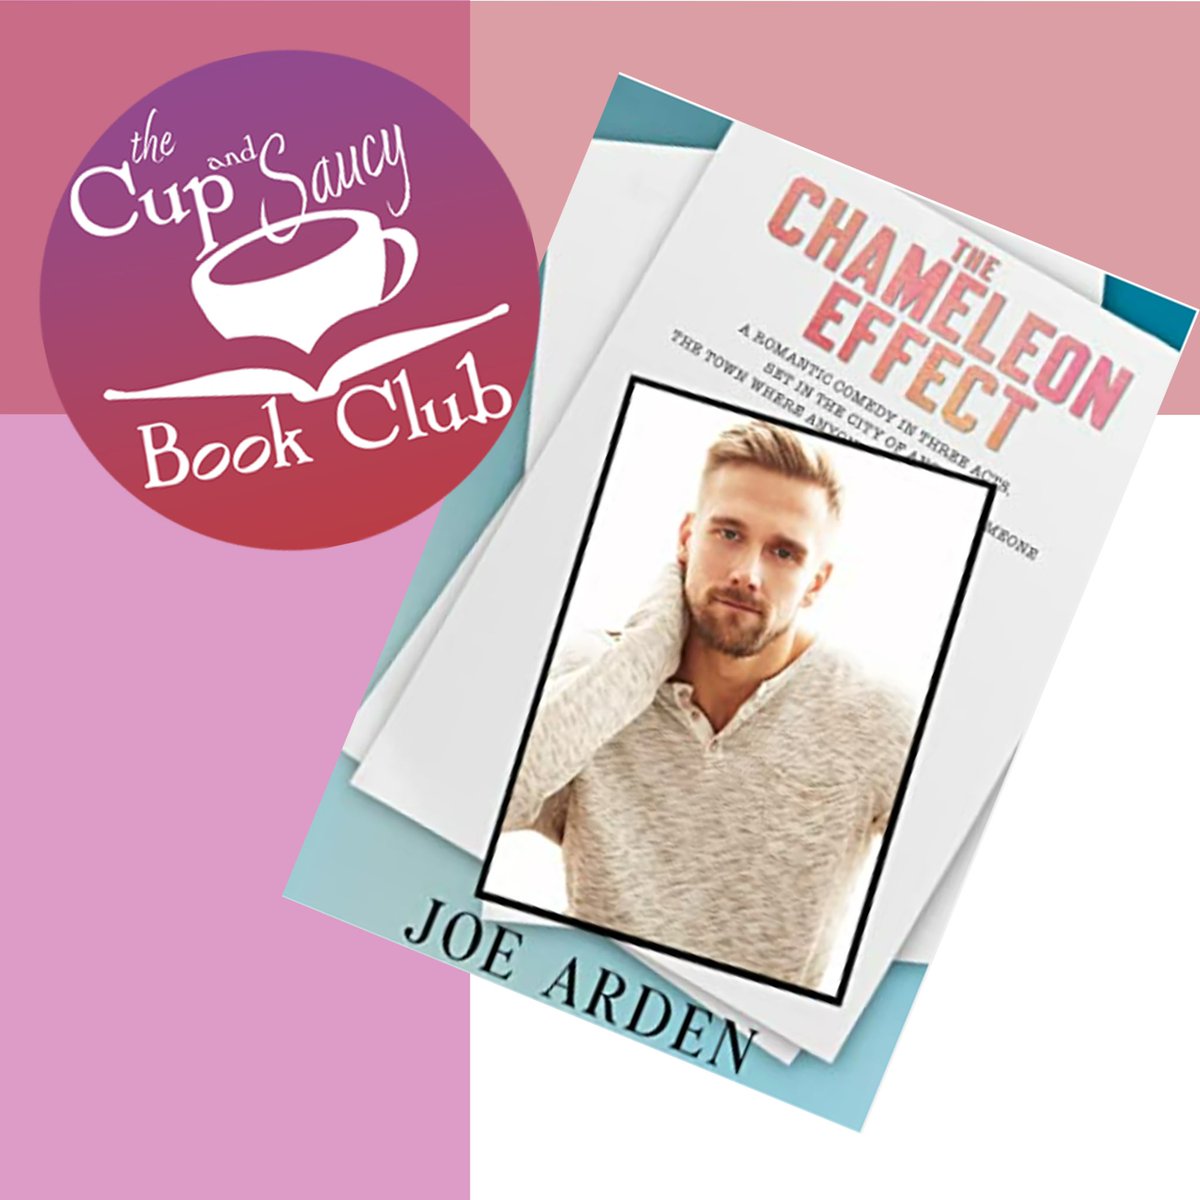 Our review of The Chameleon Effect by @TheRealJoeArden is available today on your favorite podcast platform! Alternate title: That Time Jen Had to Admit She *Might* Be Wrong About Male Romance Authors 😂